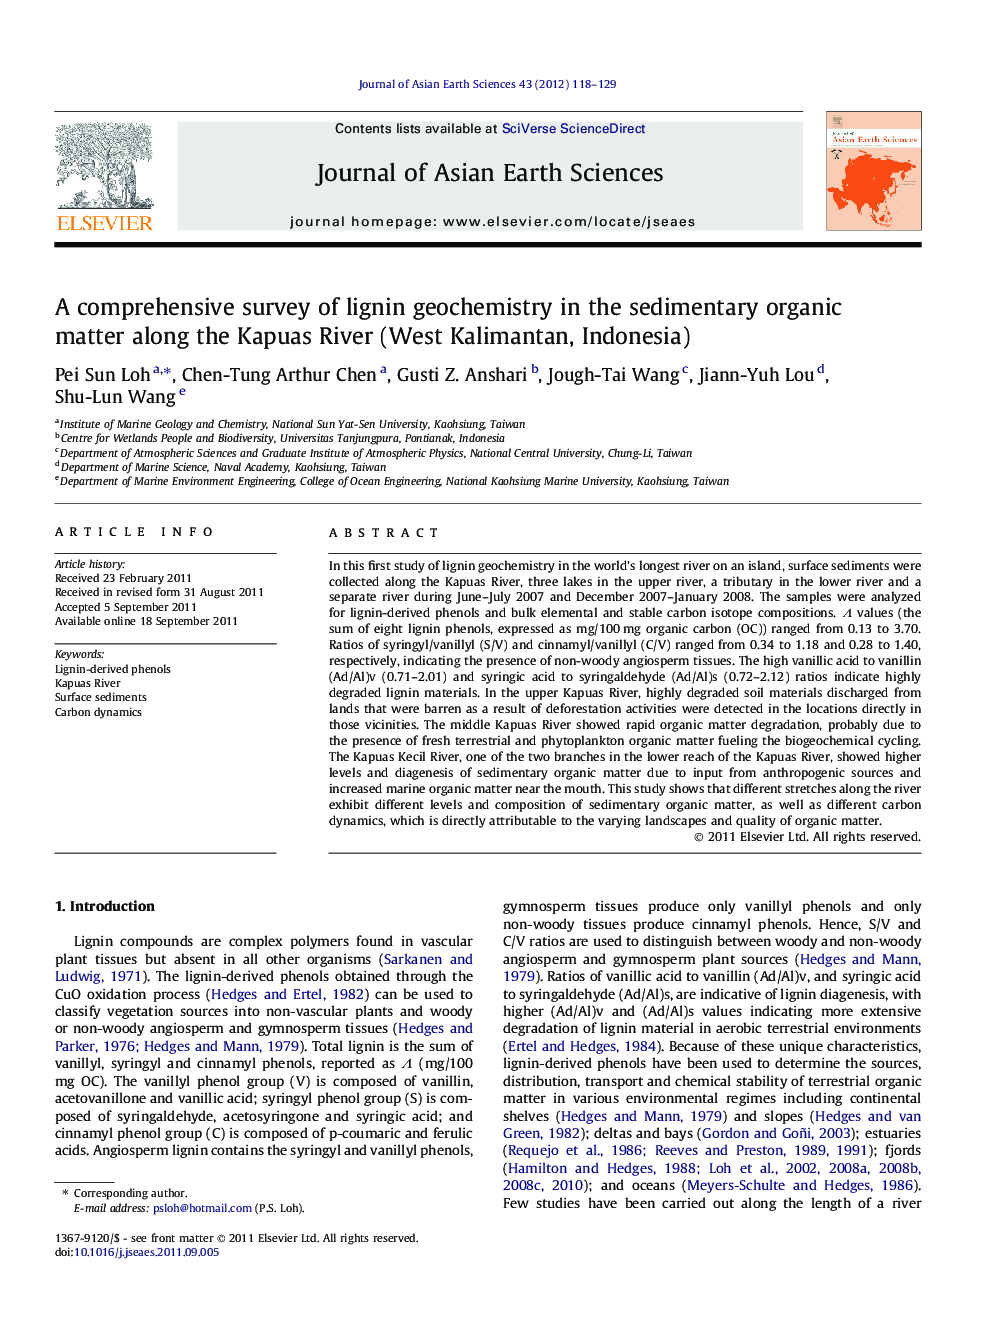 A comprehensive survey of lignin geochemistry in the sedimentary organic matter along the Kapuas River (West Kalimantan, Indonesia)